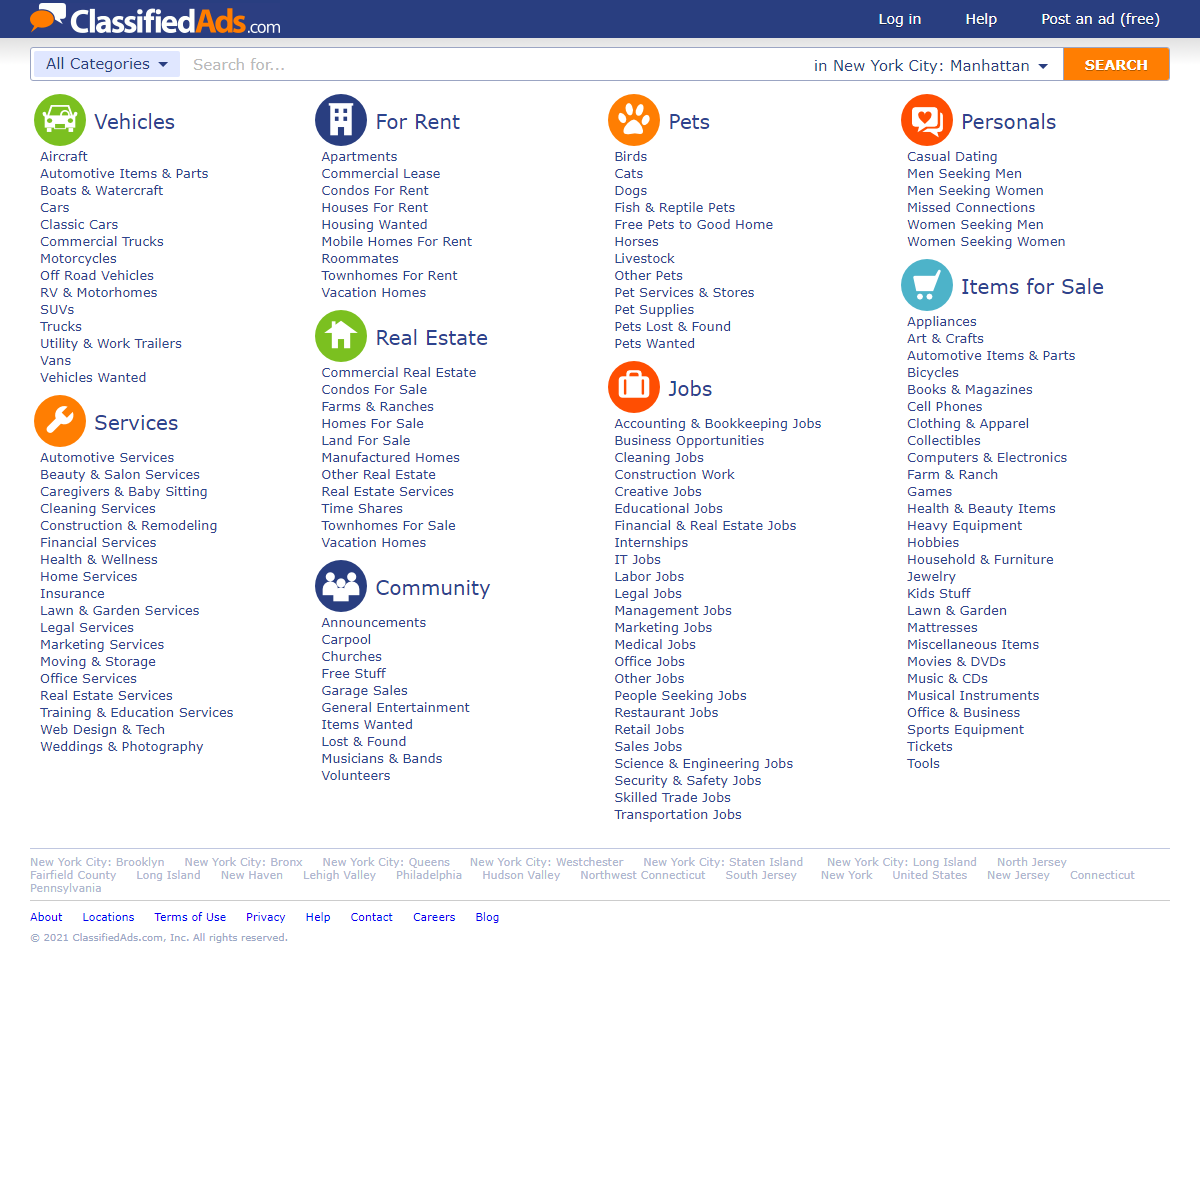 Classifieds - Free Classified Ads Online